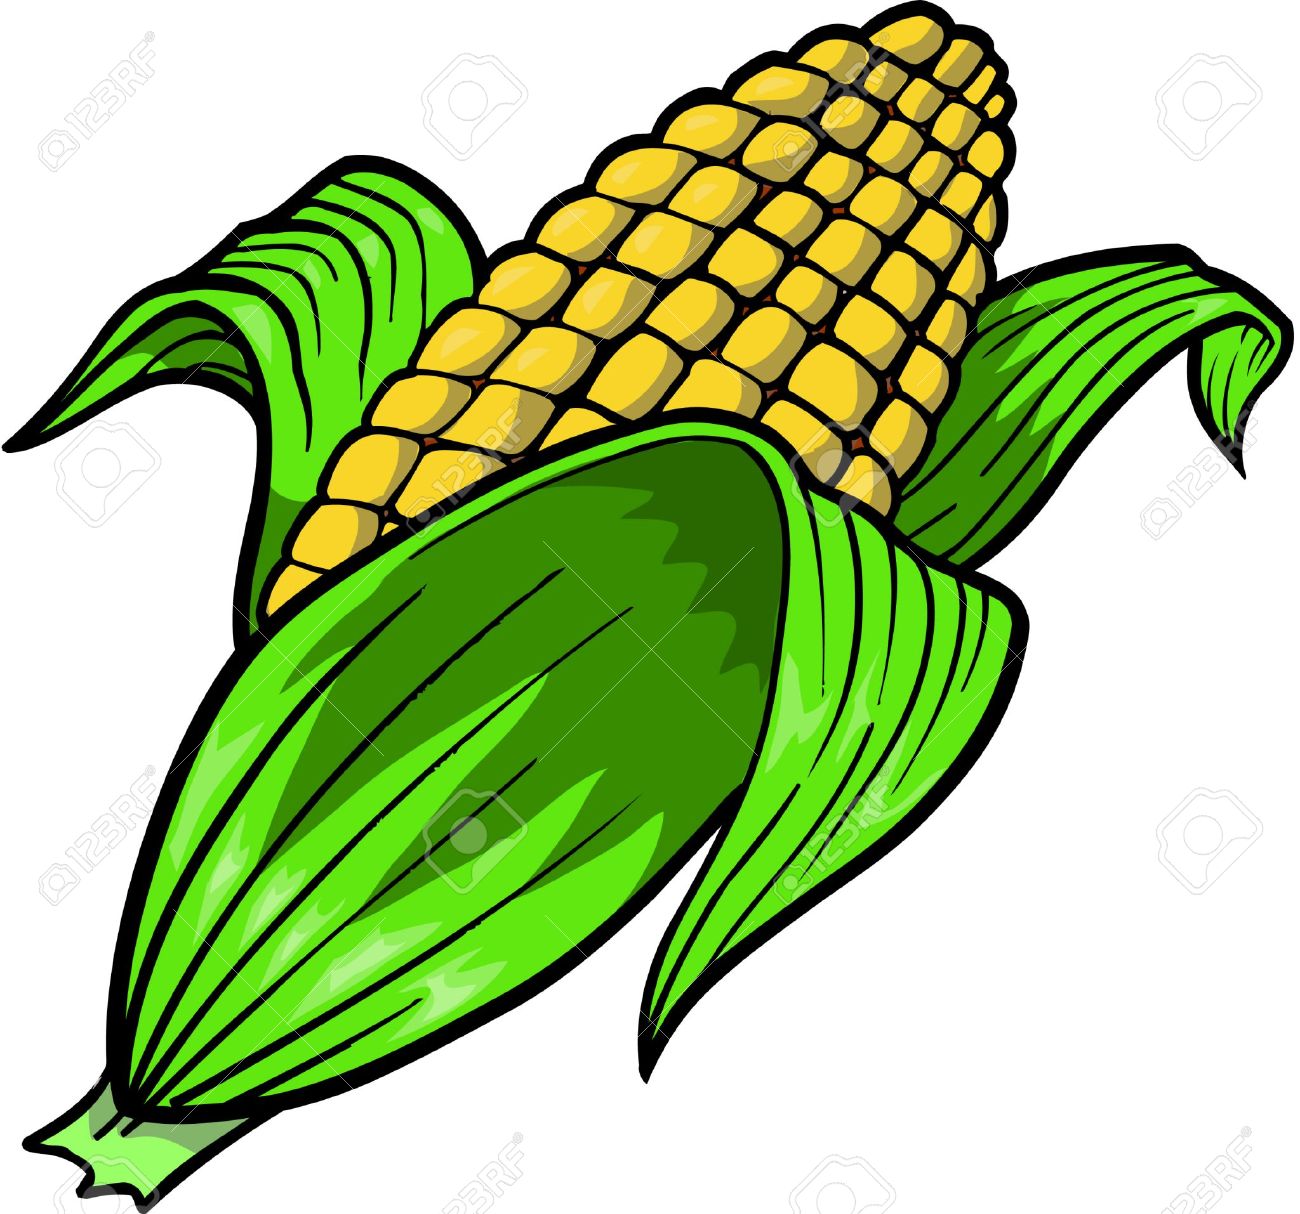 Corn clipart clipart cliparts for you